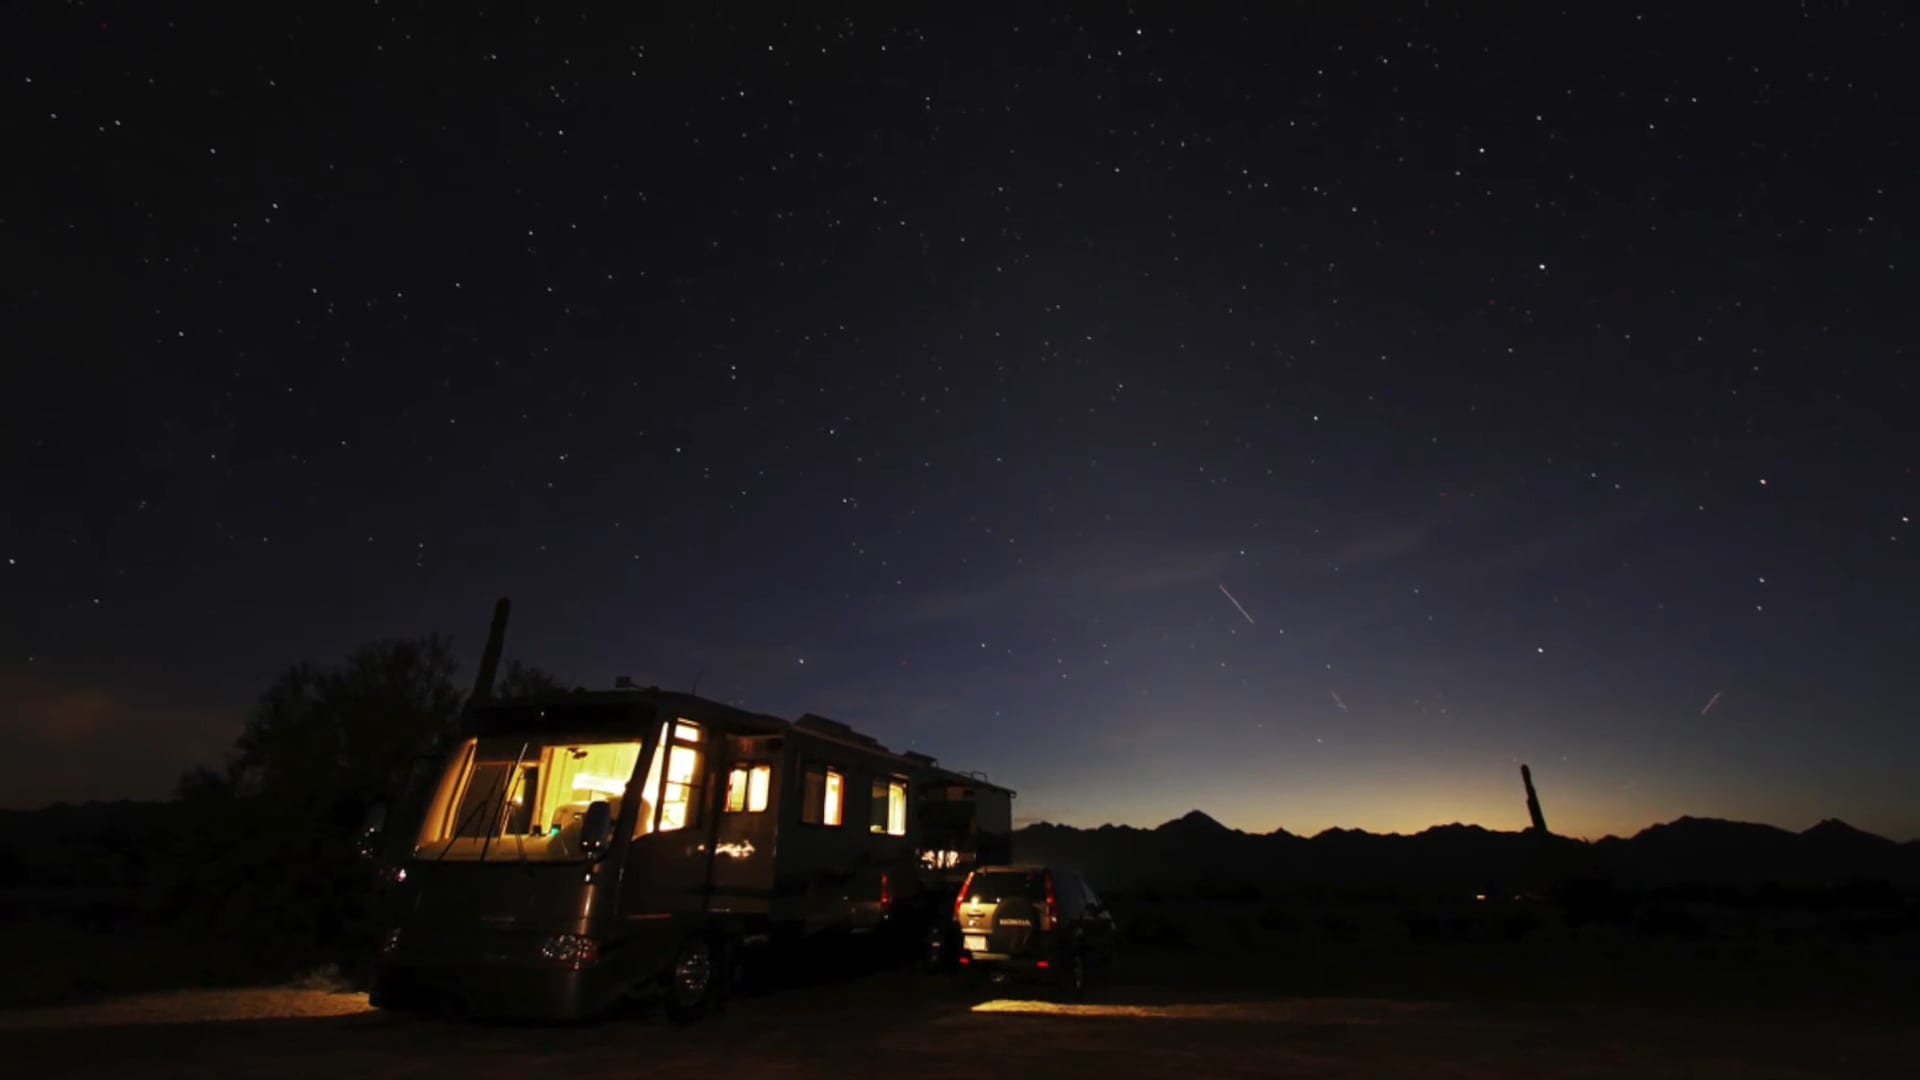 Using our boondocking tips at night